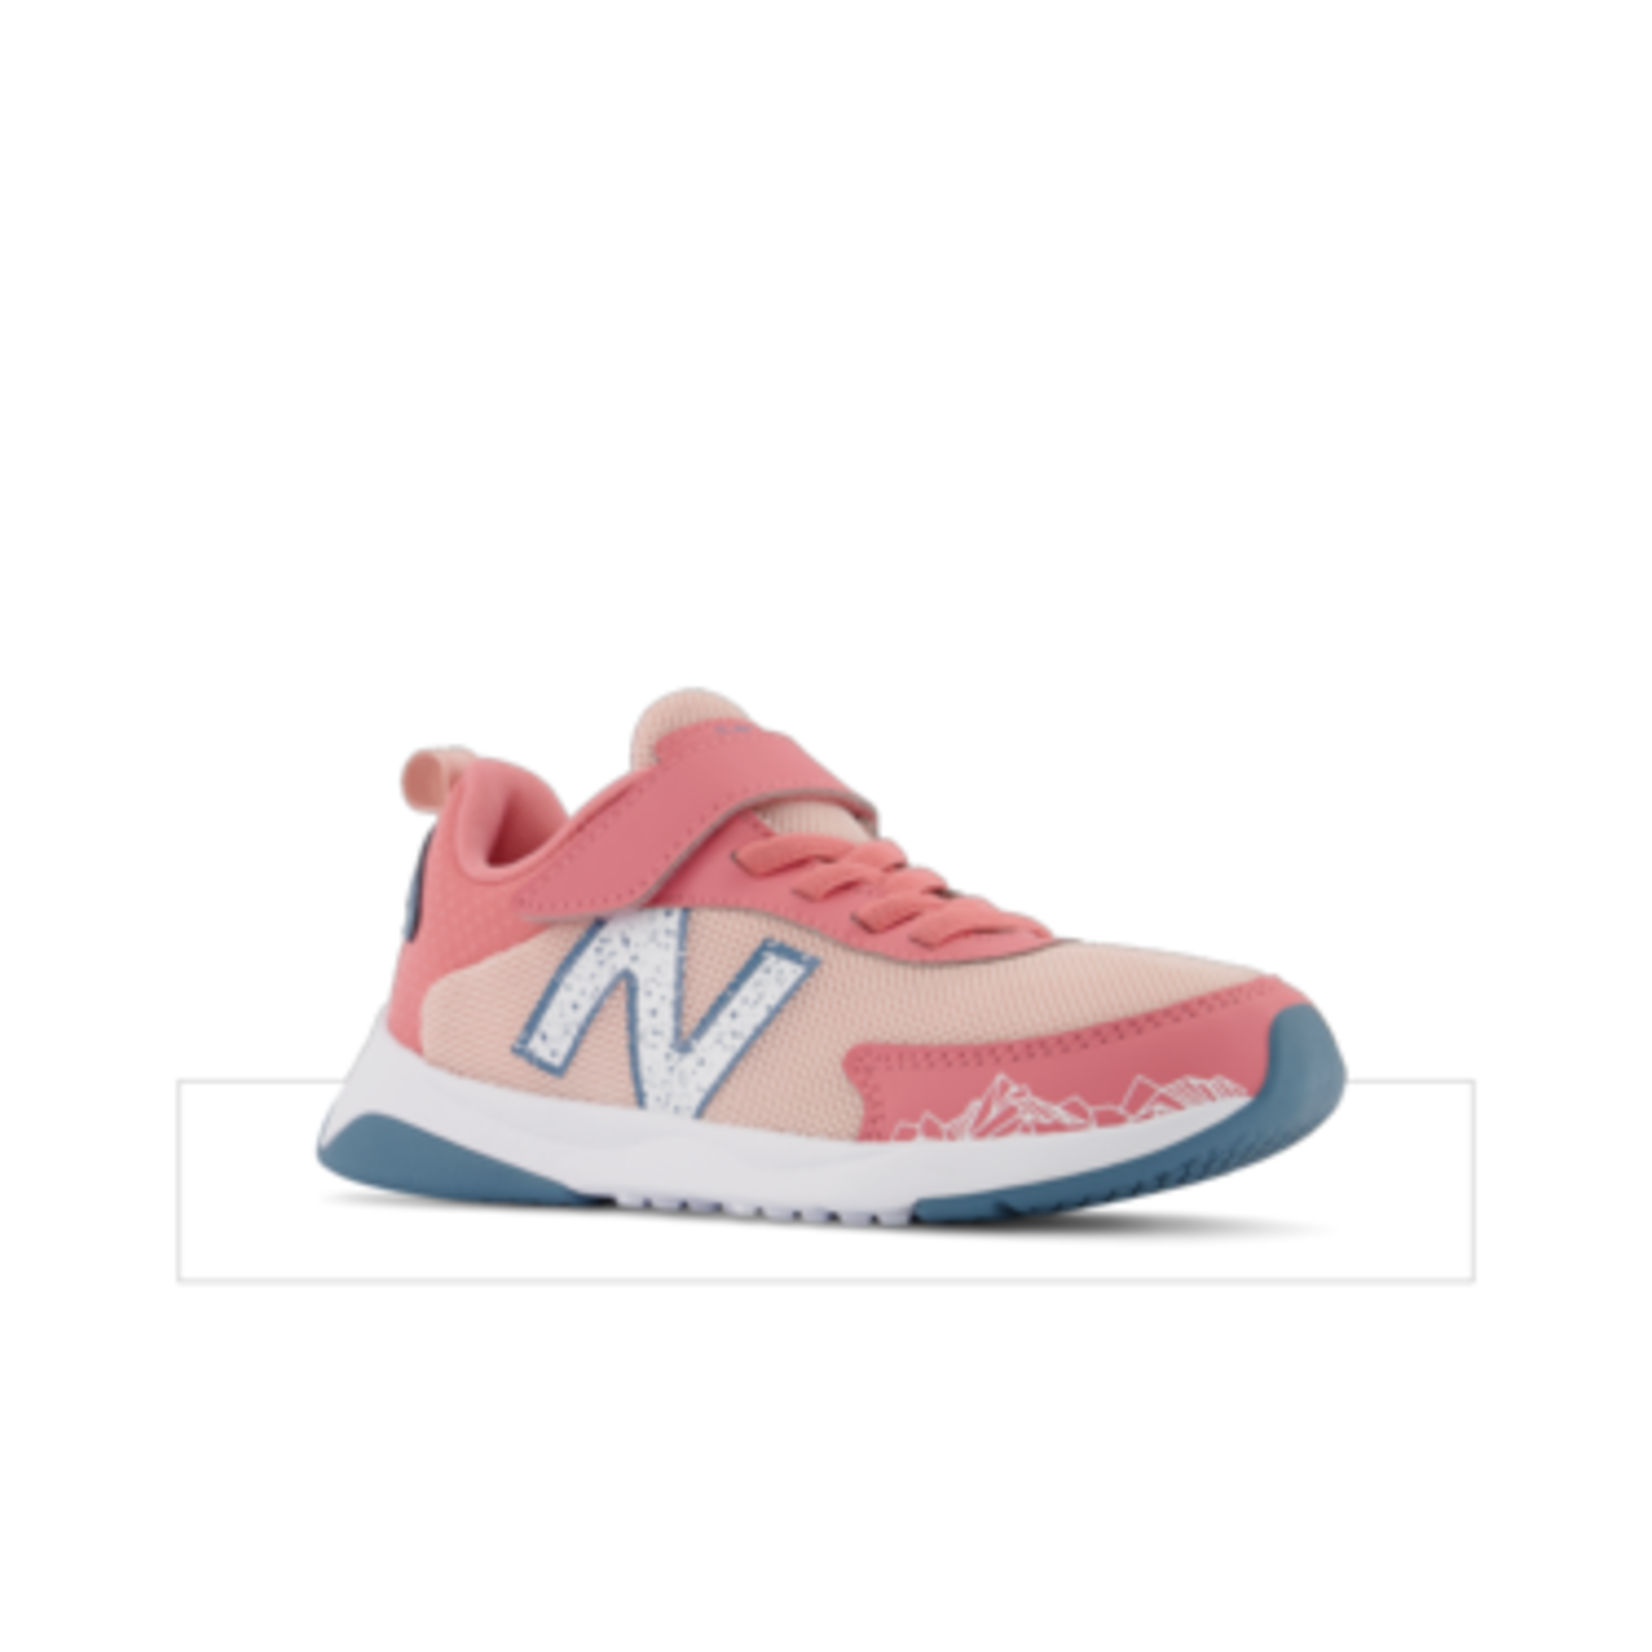 New New Balance Running Shoes, Dynasoft 545, Girls - Time-Out Sports Excellence